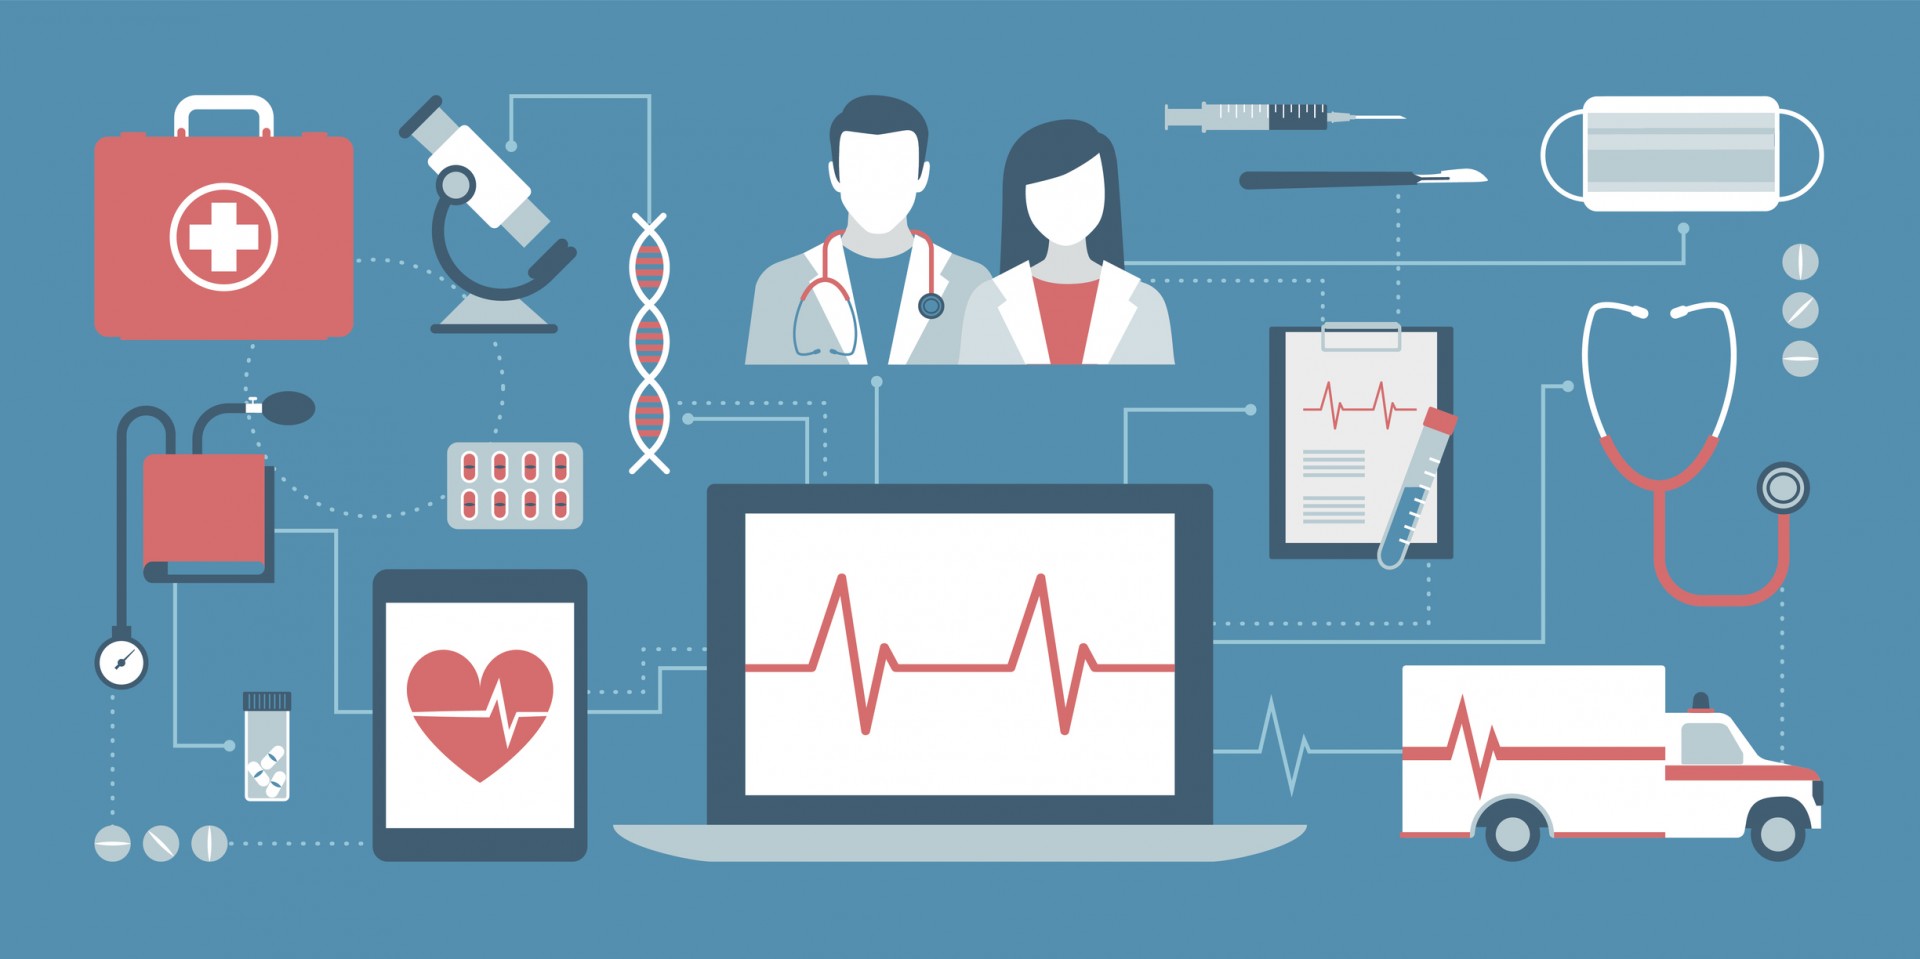 Healthcare Claims Management Market Expected to Grow at a Higher CAGR of 5.70% by 2025 : Cerner Corporation, Allscripts Healthcare Solutions, Eclinicalworks, Optum, Inc., Mckesson Corporation